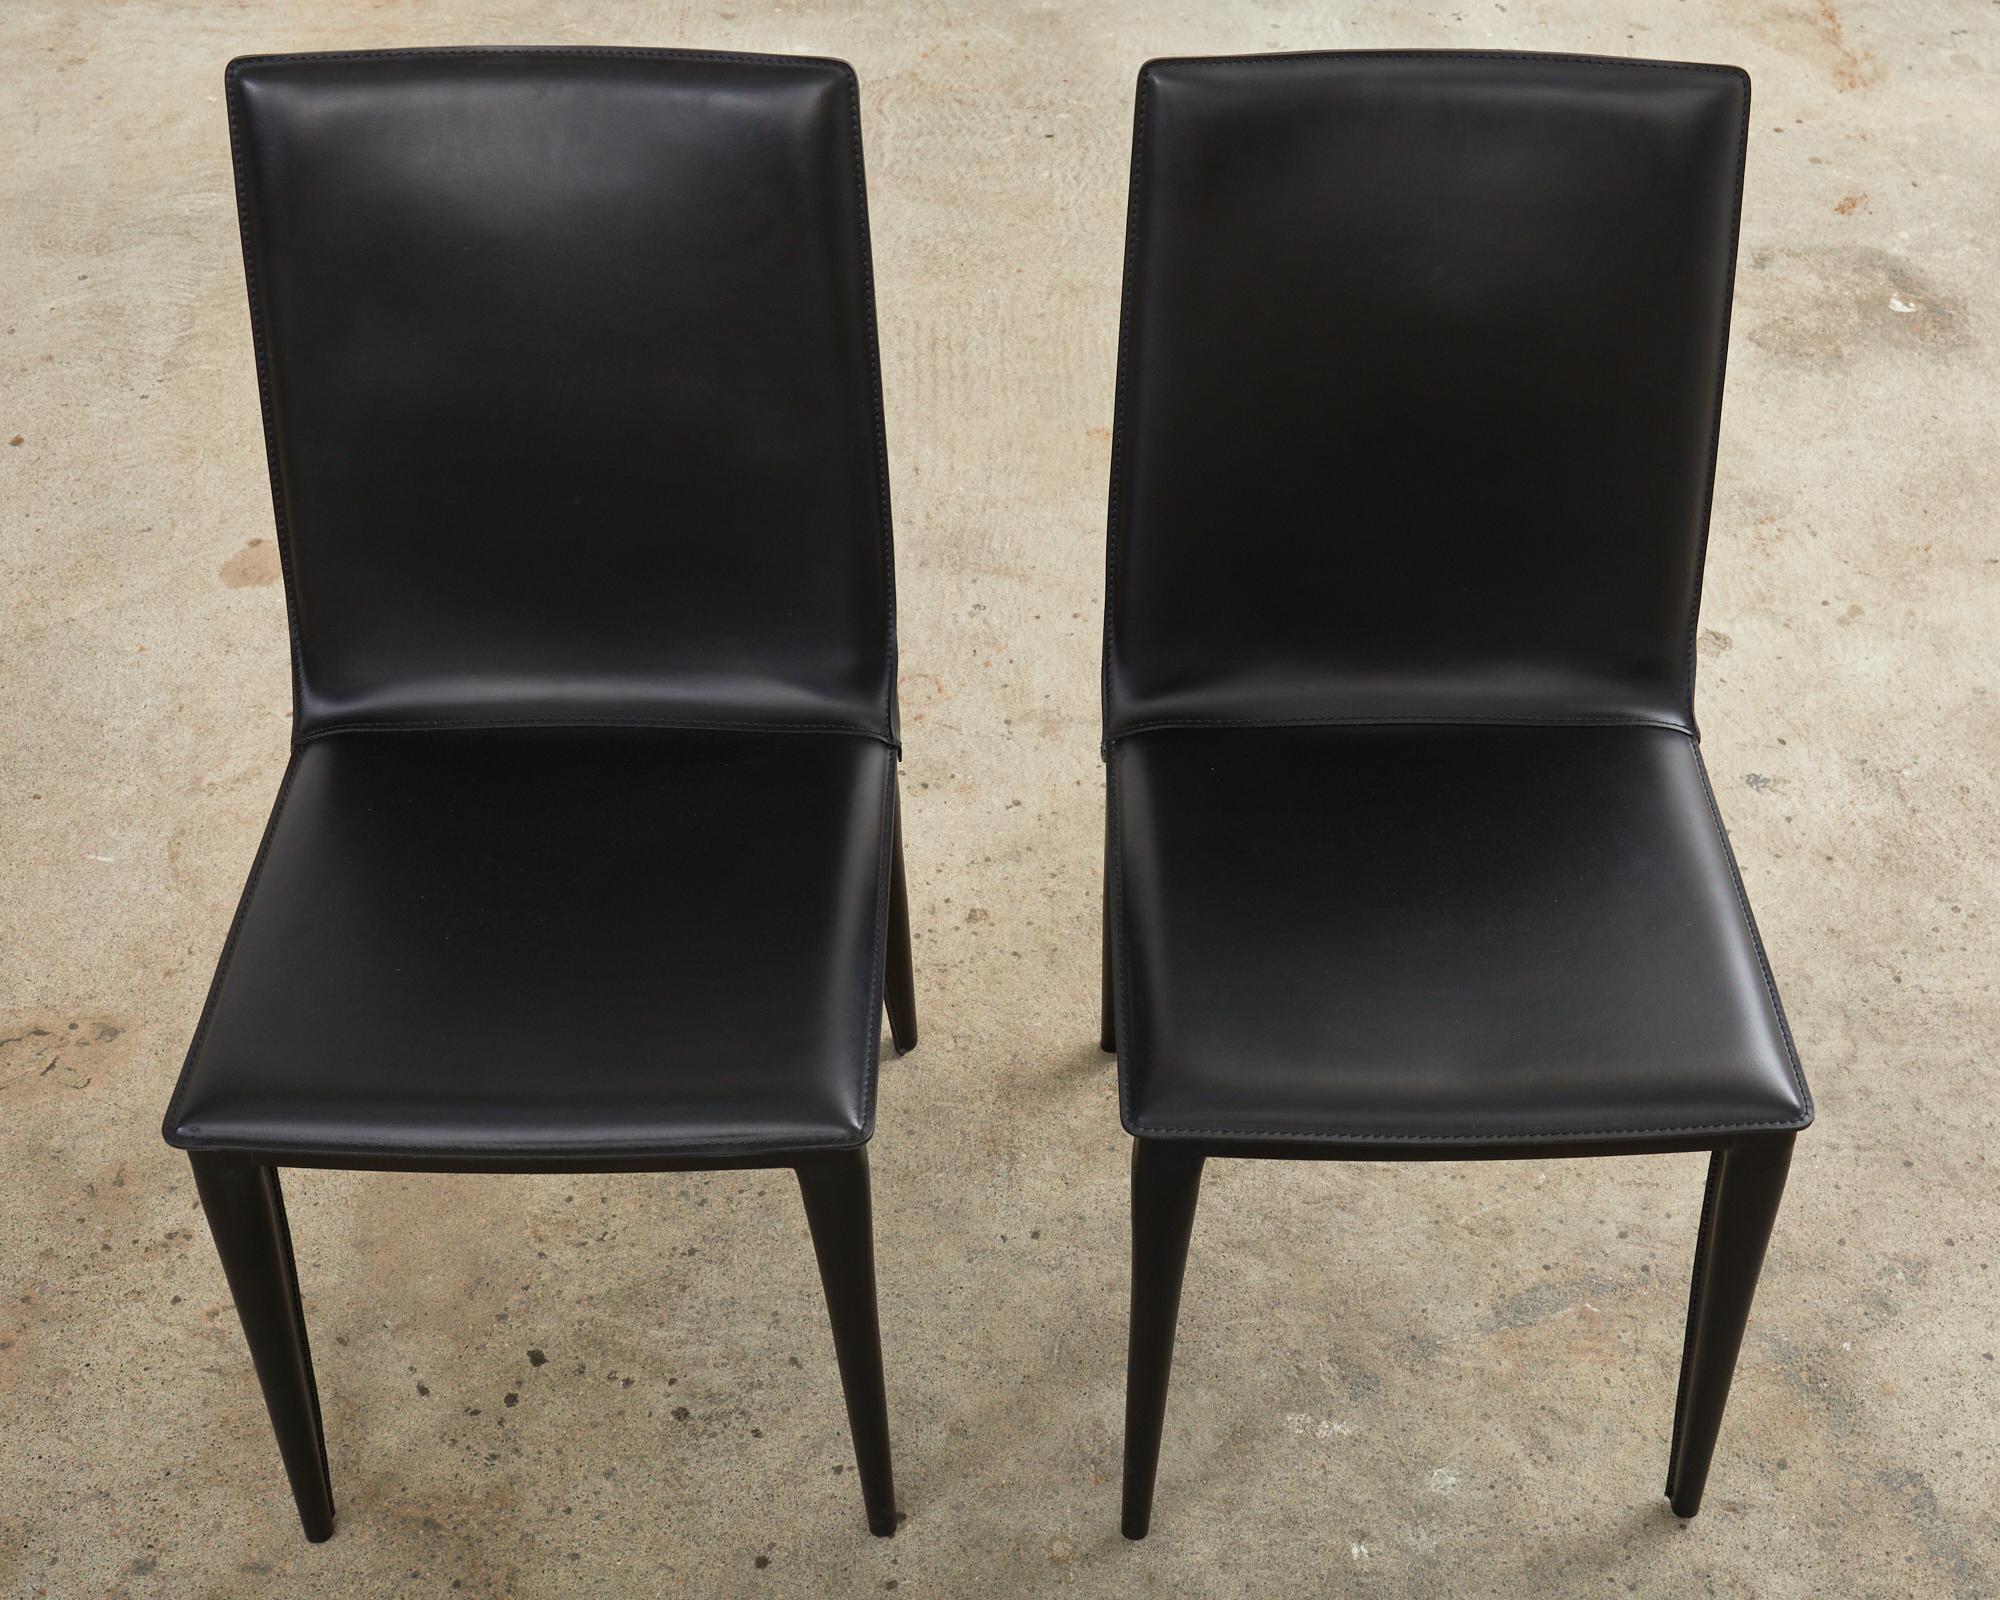 Steel Set of Eight Mario Bellini Style Italian Leather Dining Chairs by Frag